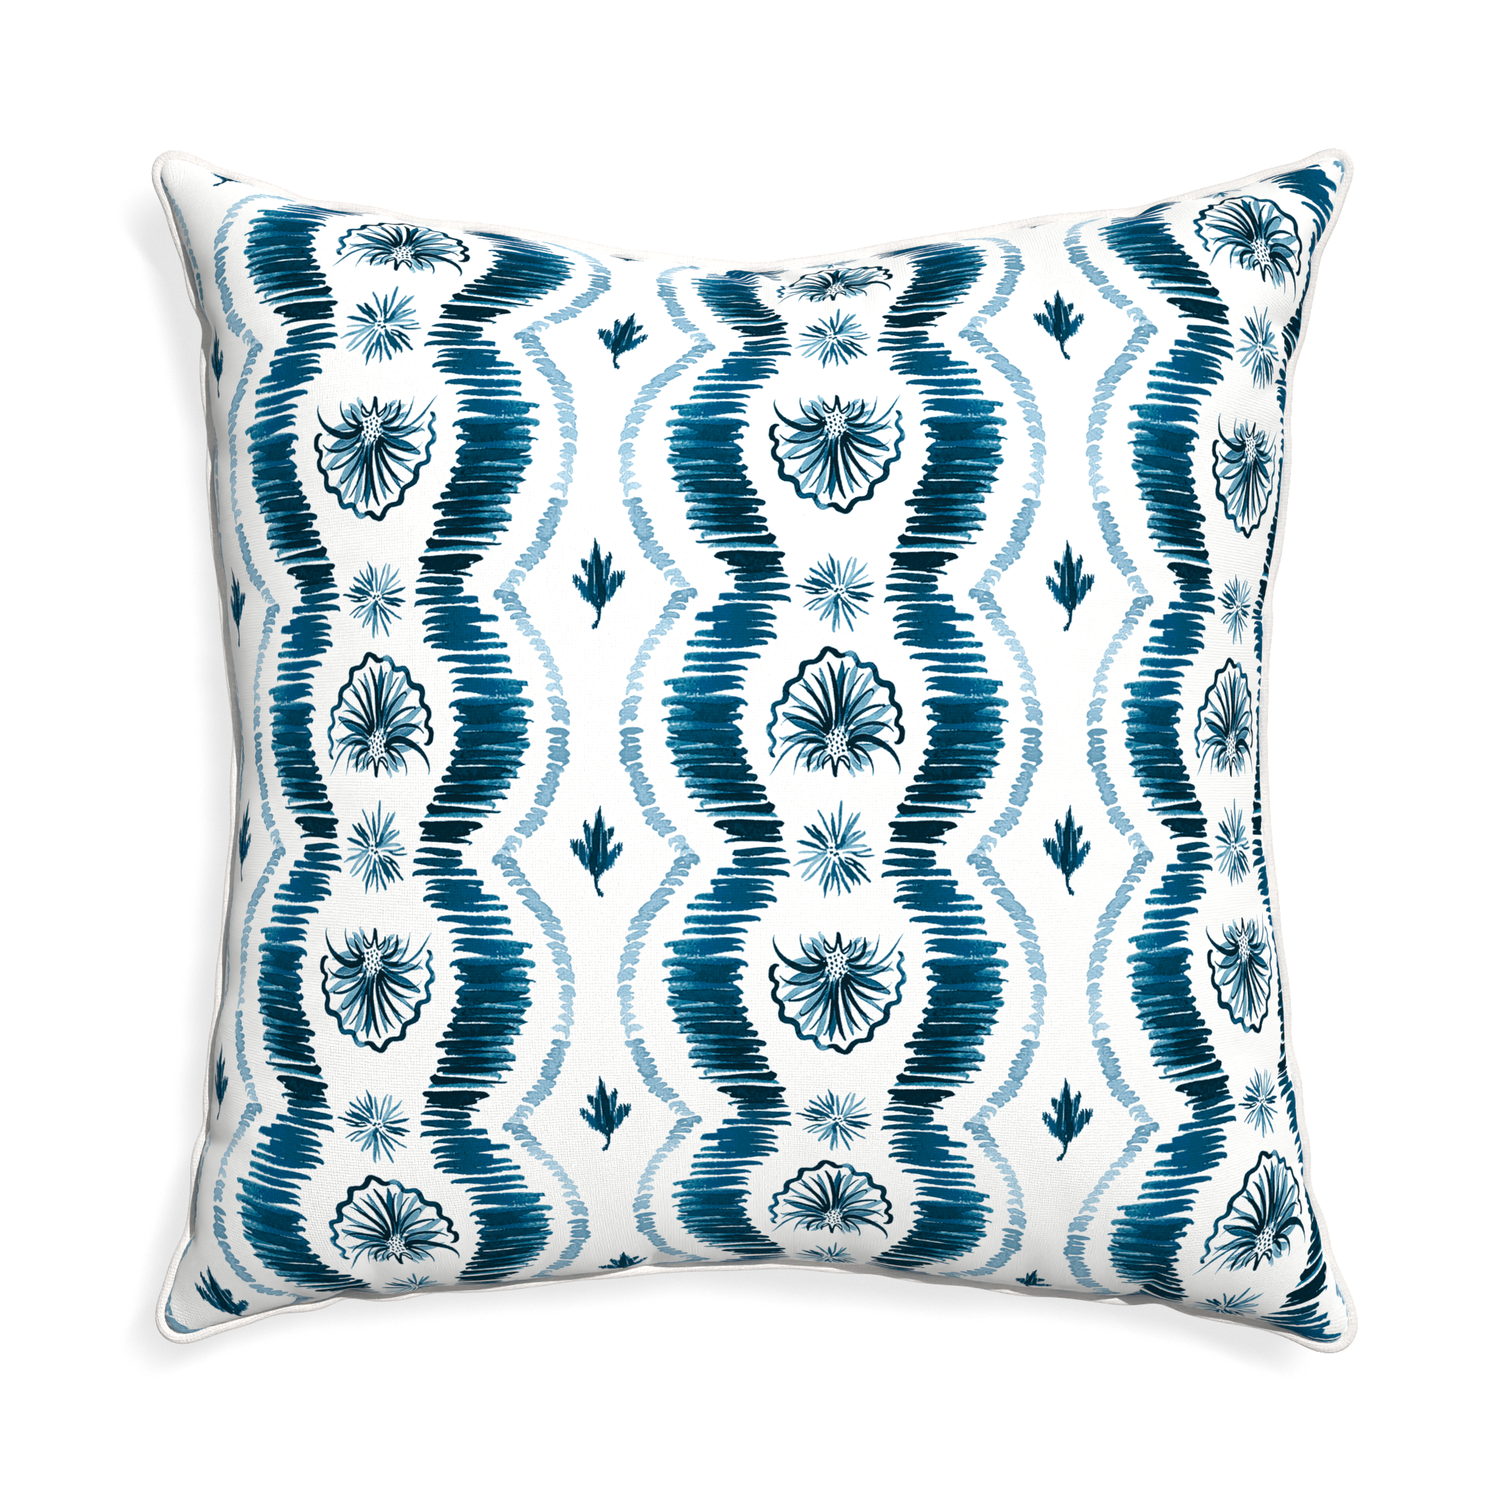 Euro-sham alice custom blue ikatpillow with snow piping on white background